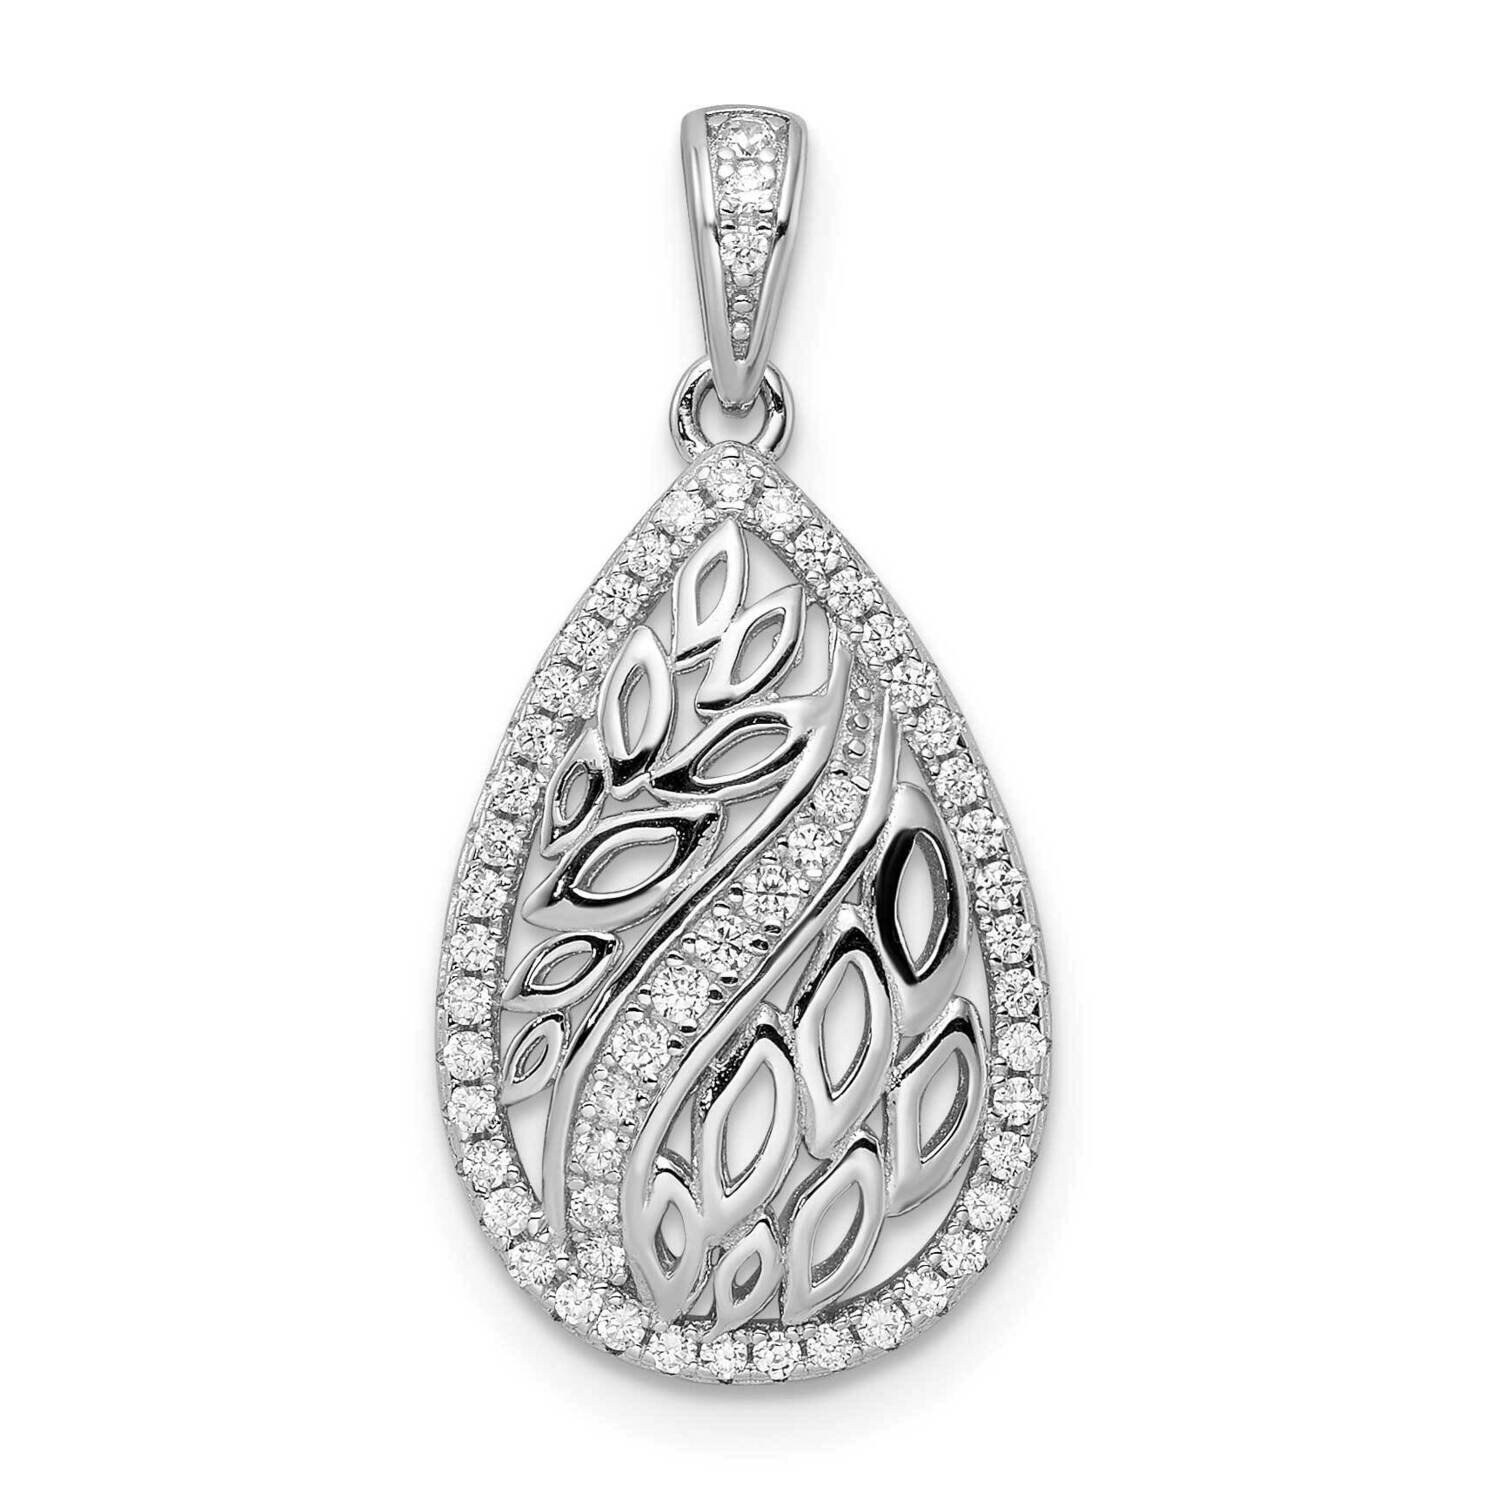 Leaves and CZ Diamond Teardrop Pendant Sterling Silver Rhodium-Plated QP5463